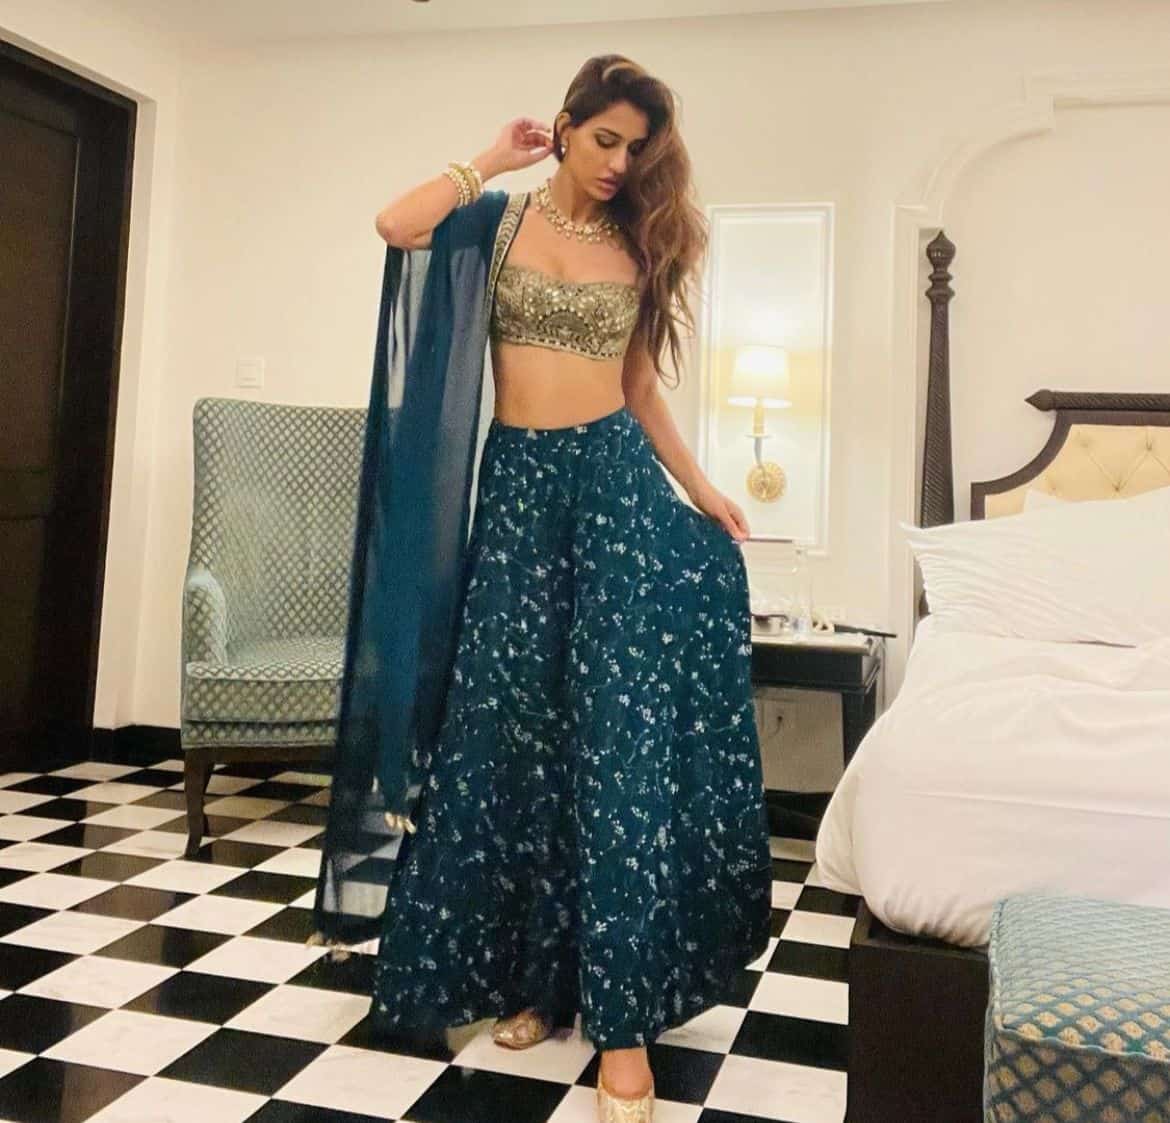 5. Disha Patani poses in her turquoise and gold lehenga. She looks stunning in this Indian attire.